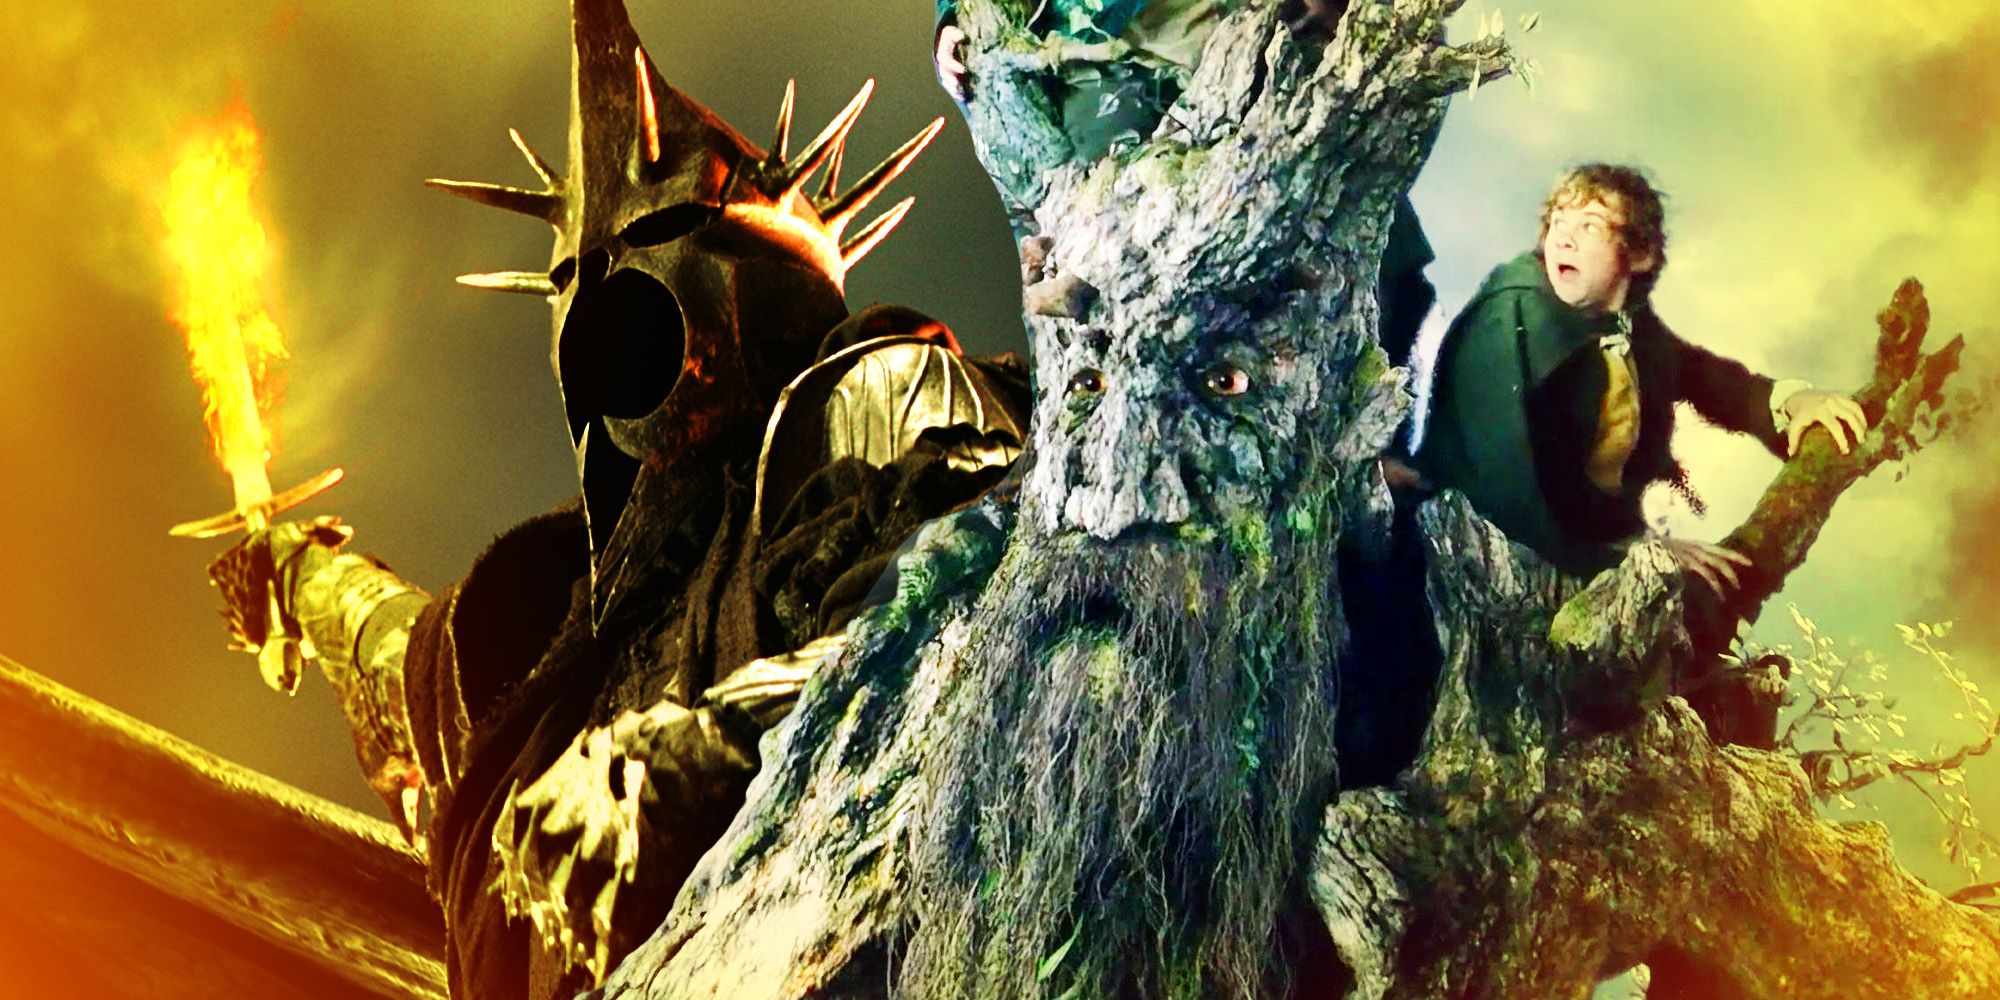 The Witch King and Treebeard from The Lord of the Rings Trilogy